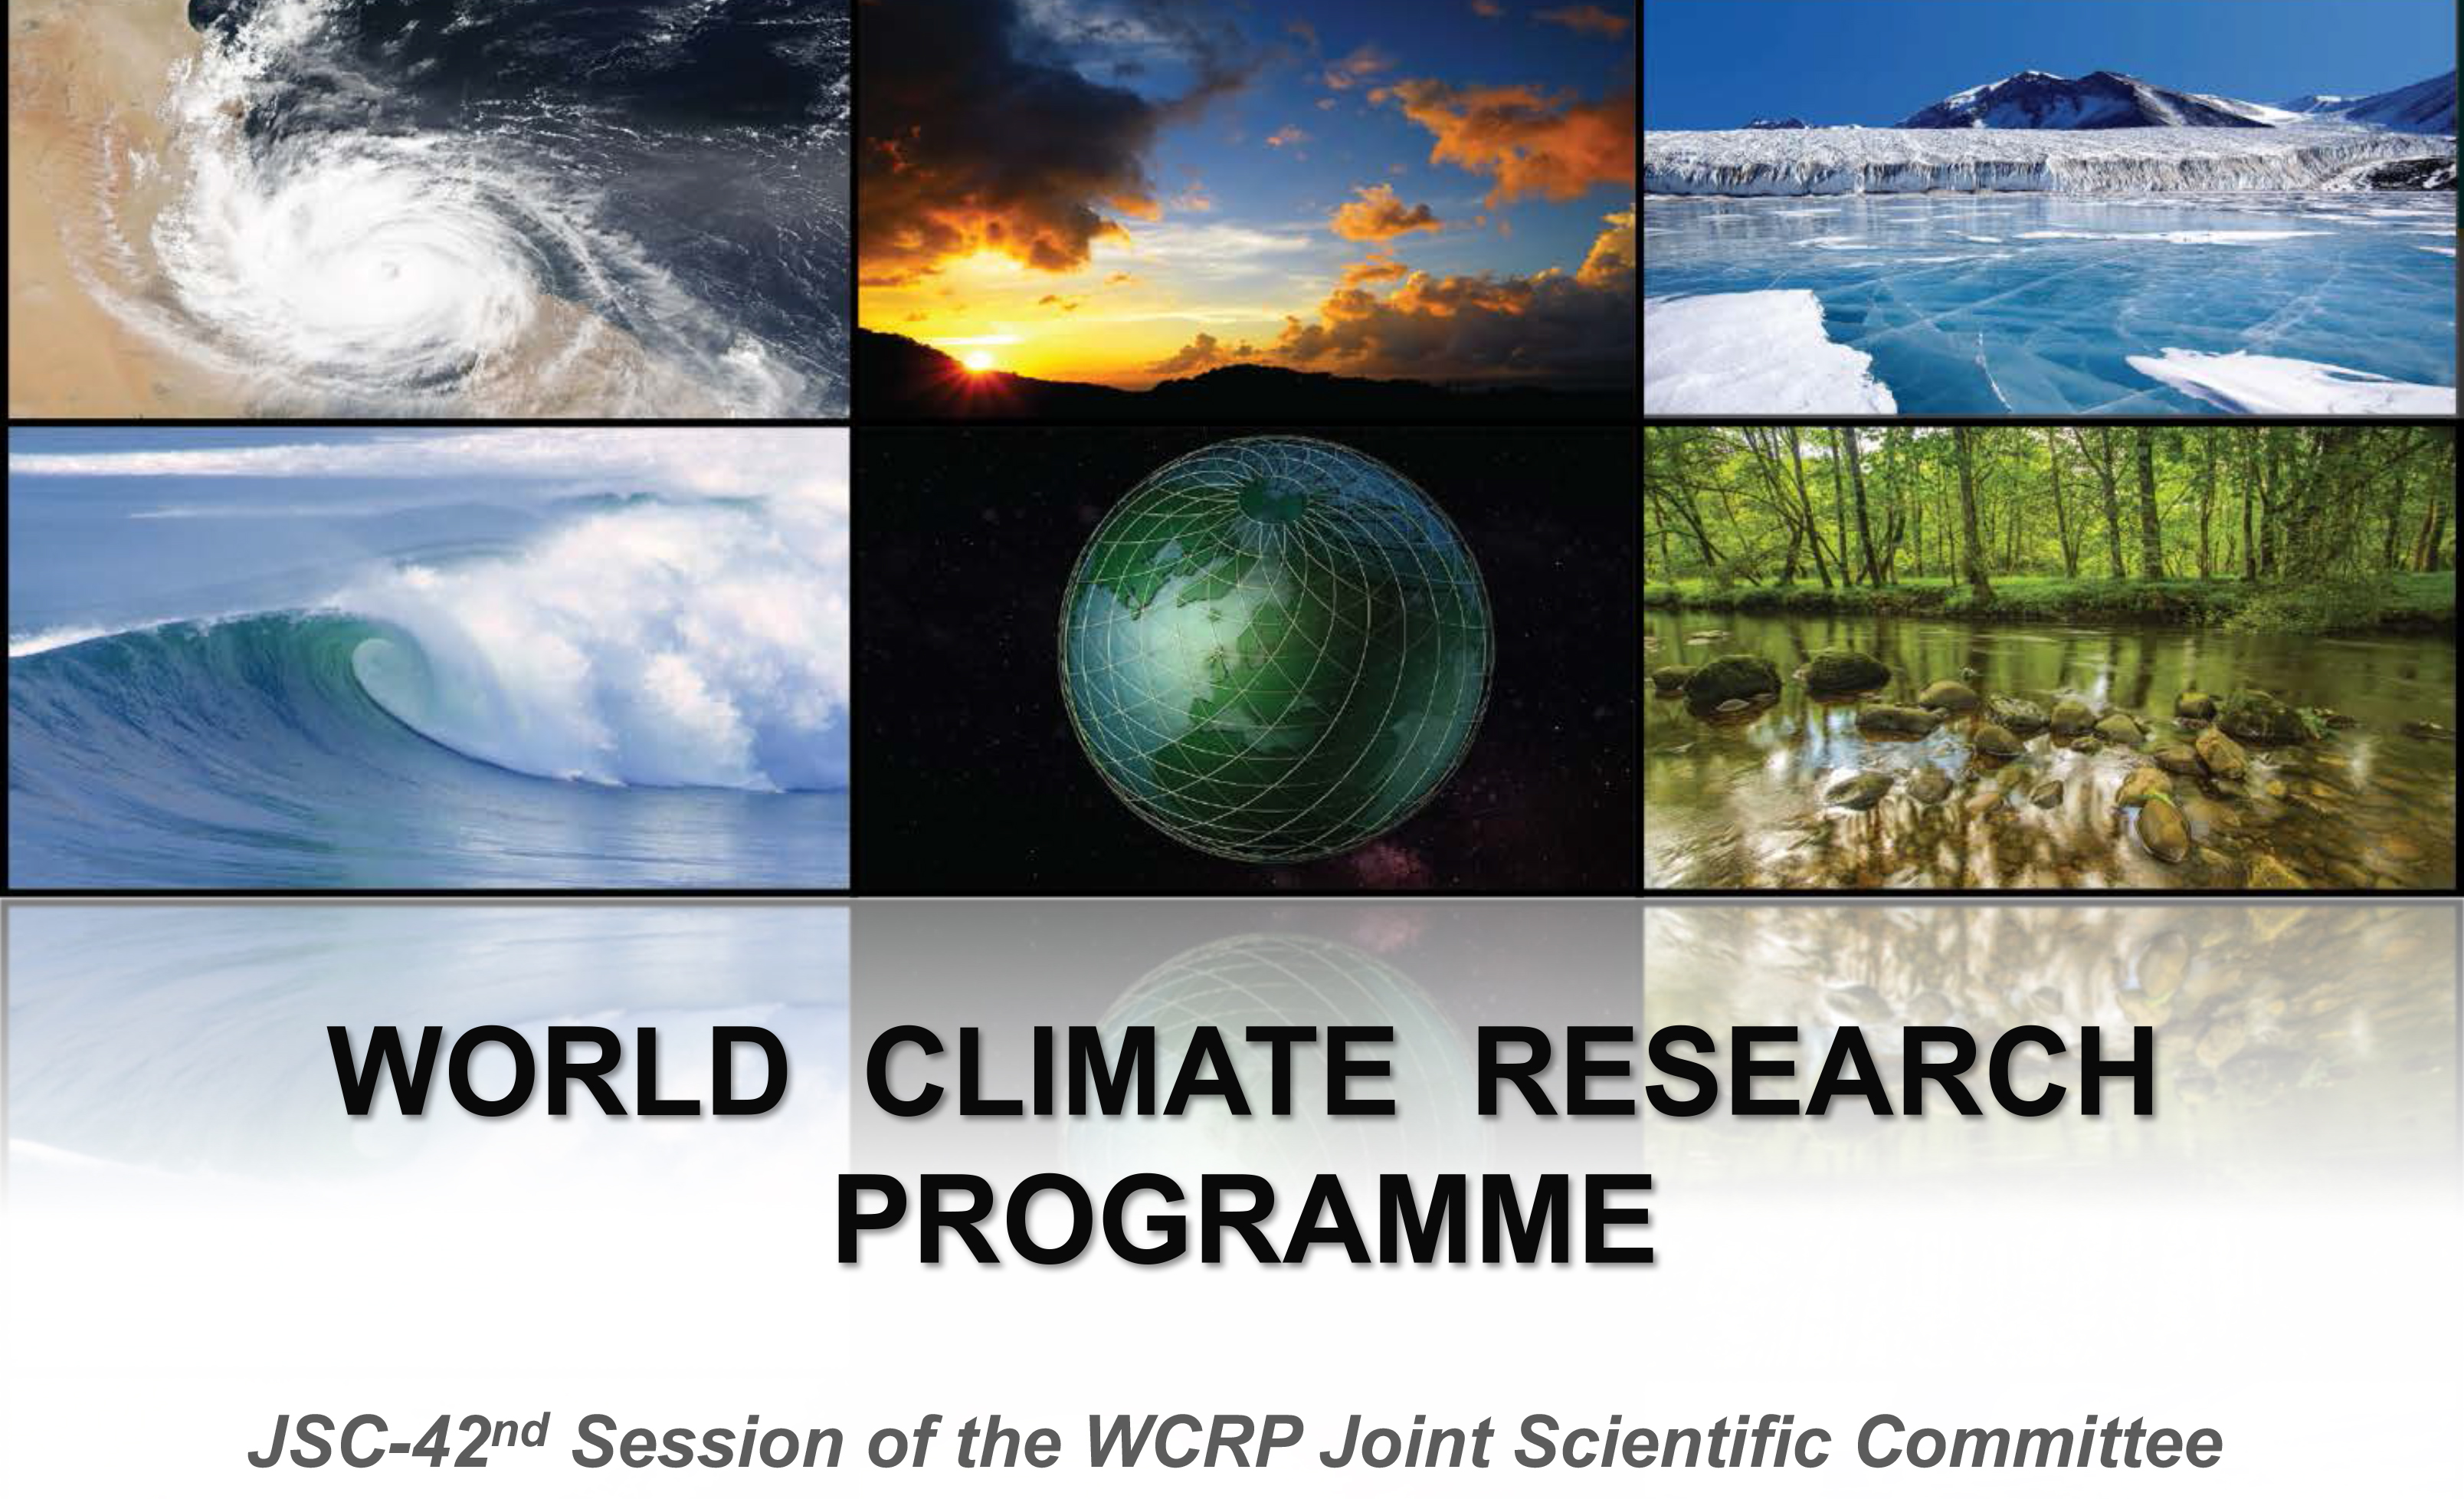 42 Session of the WCRP's JSC